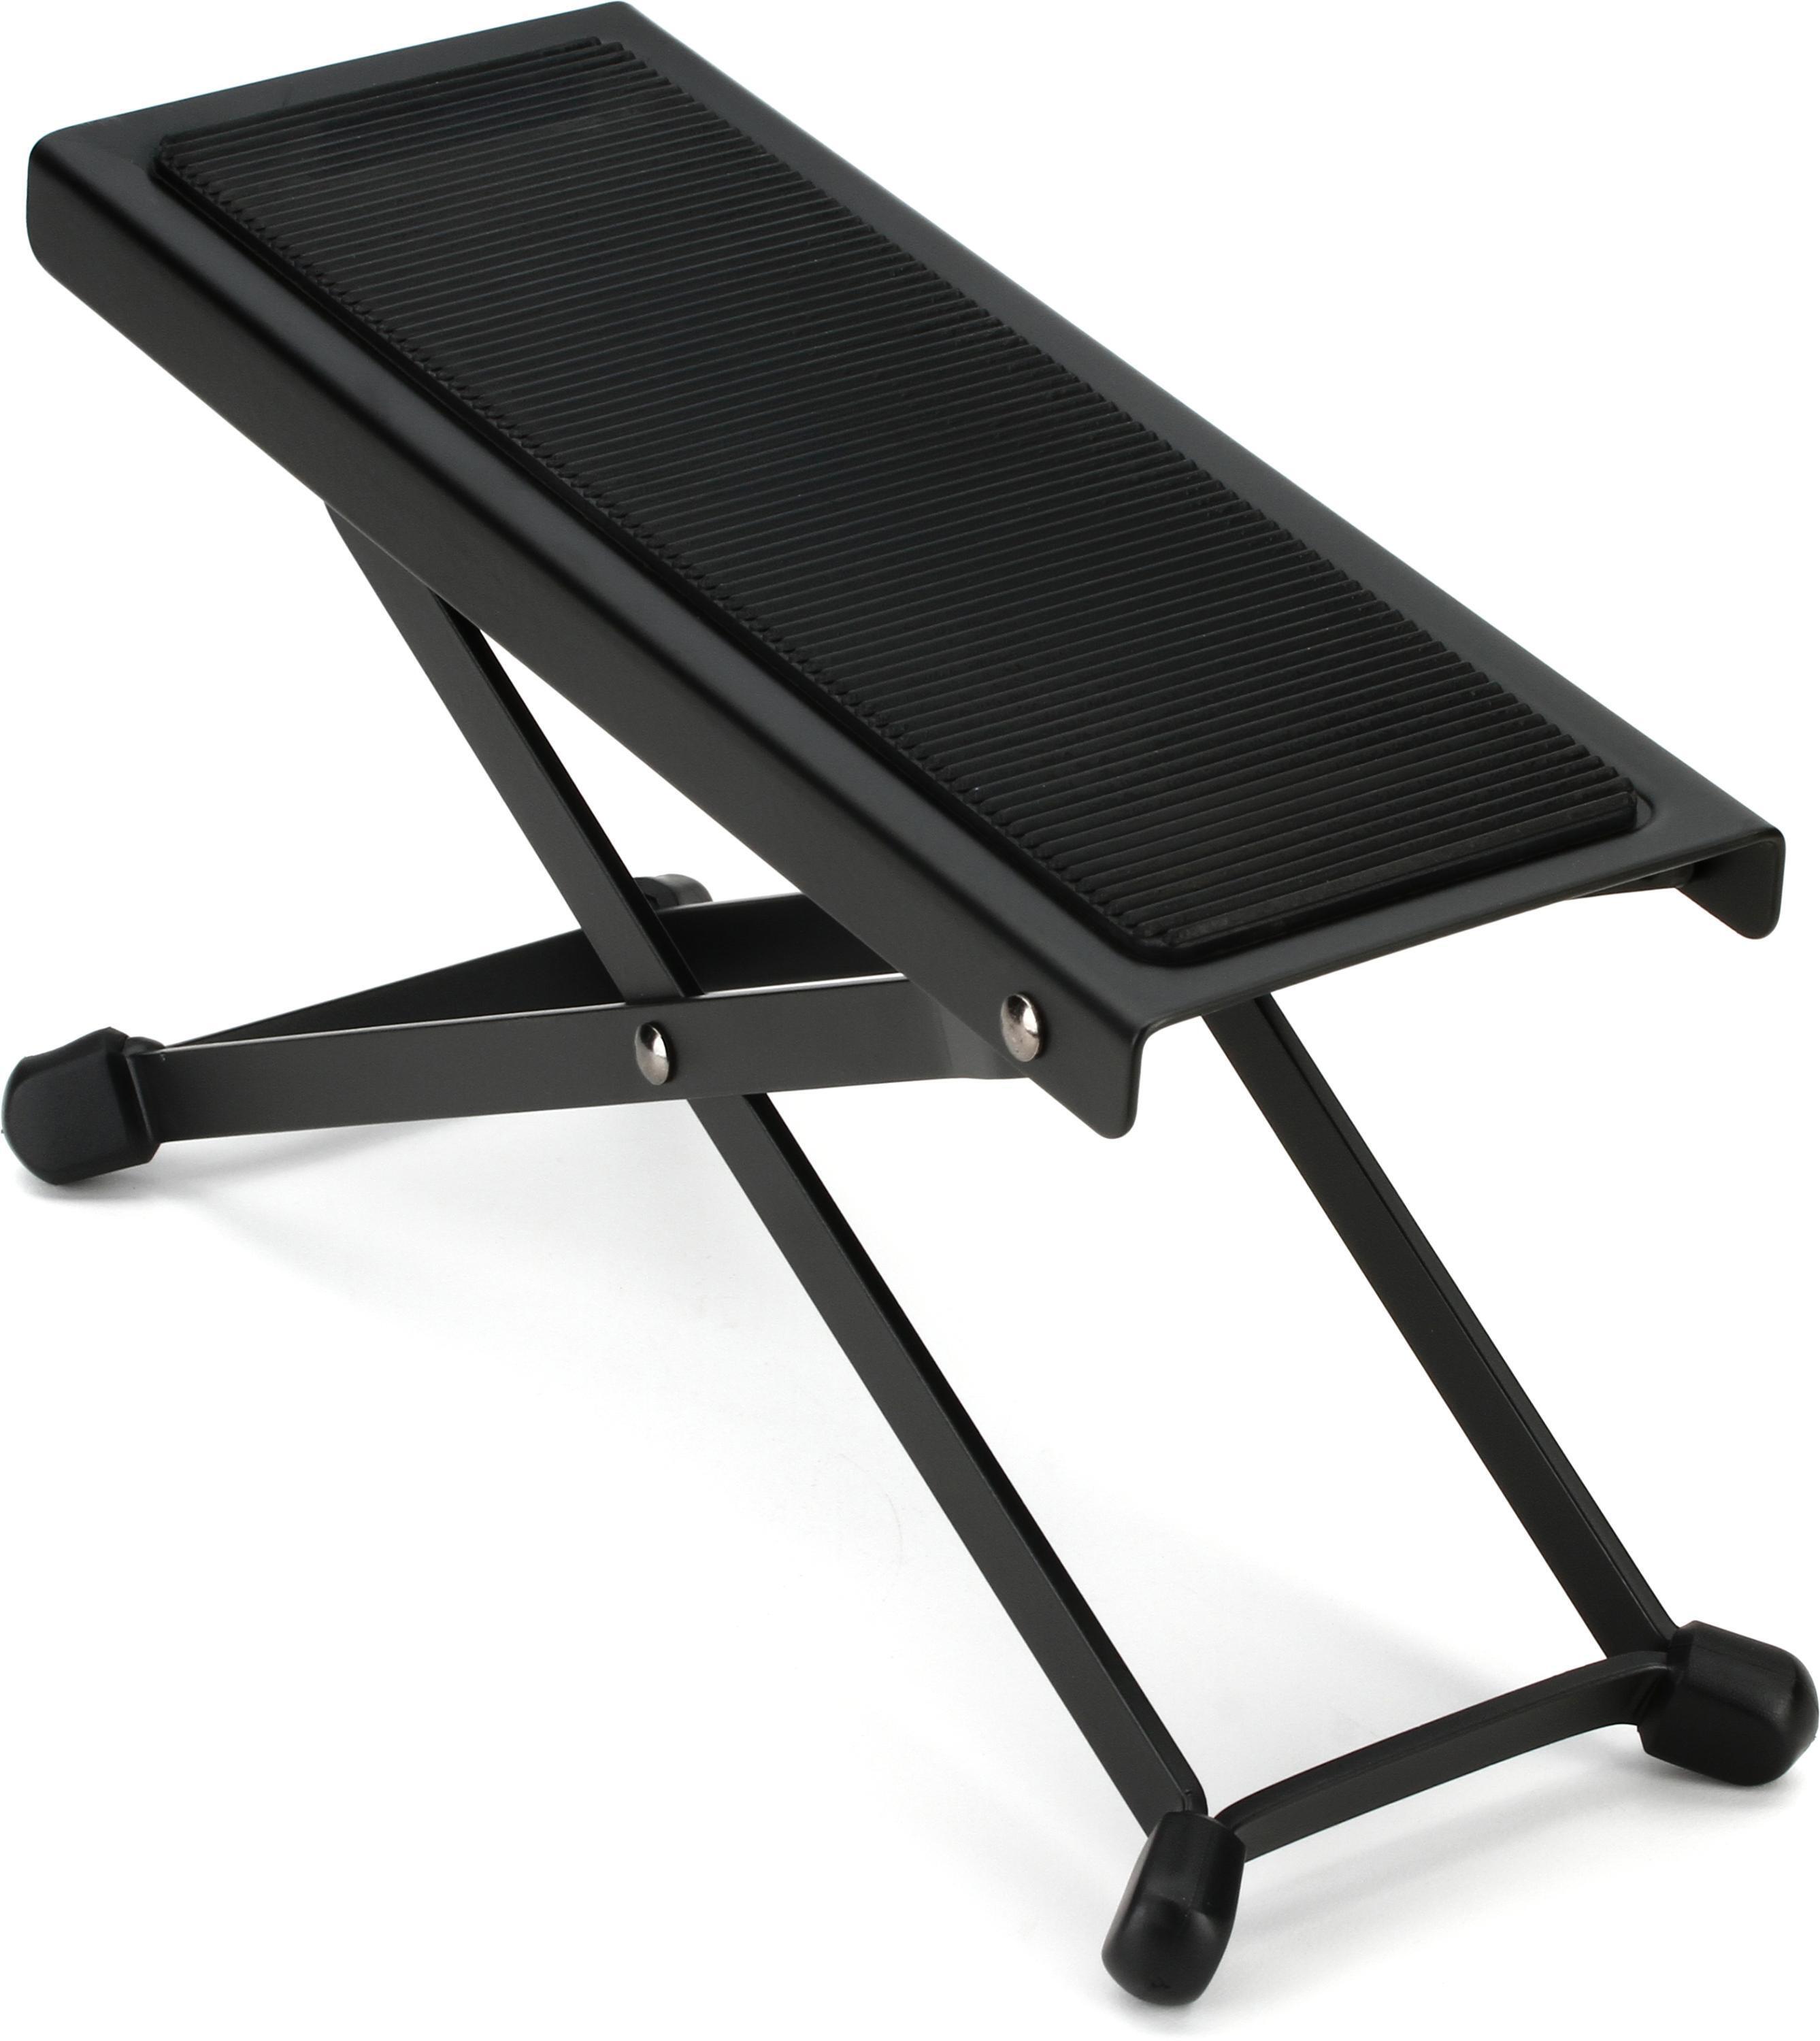 Adjustable Guitar Foot Rest Music Classical Footrest Acoustic Footstool  Stand 